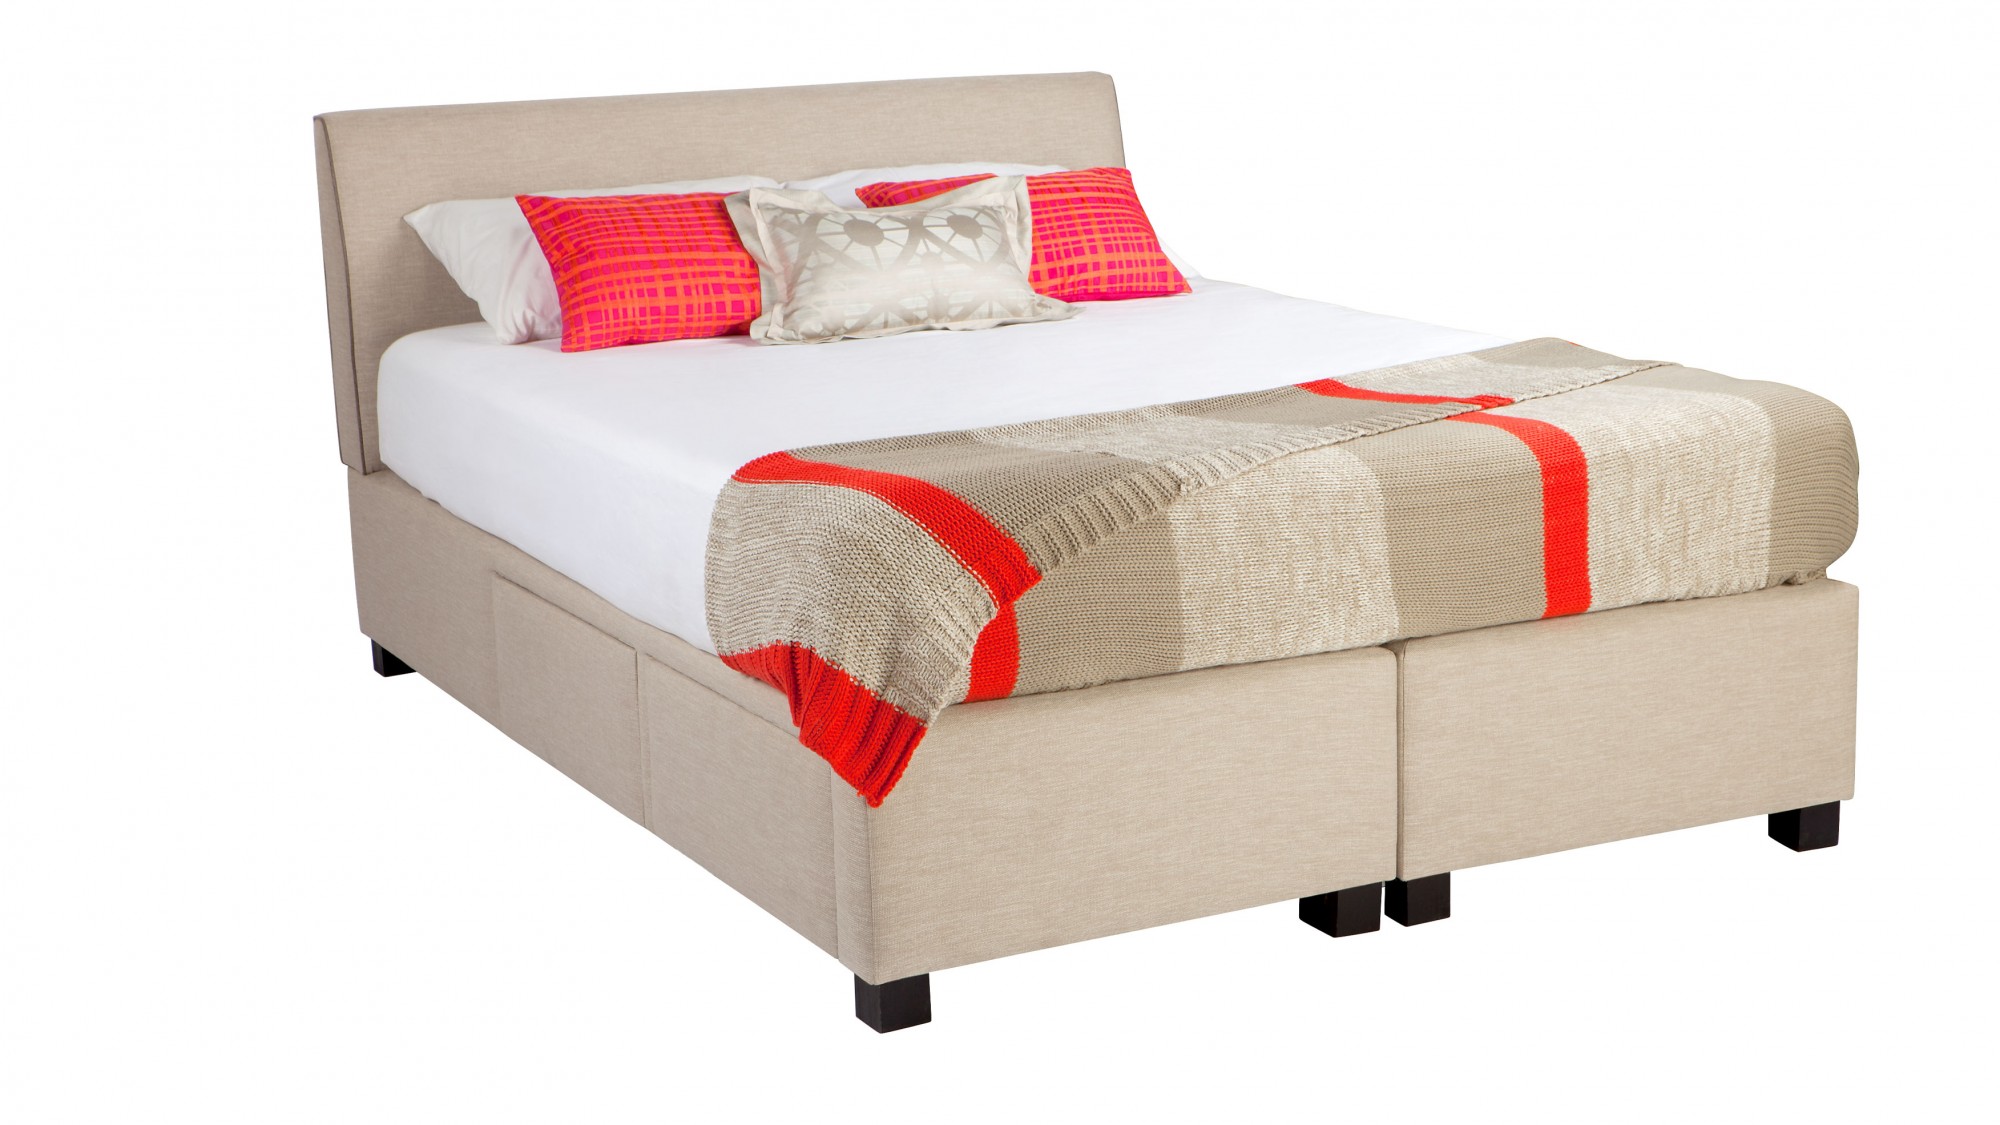 Bono Custom Upholstered Kids Bed With, Kid Bed Frame With Storage